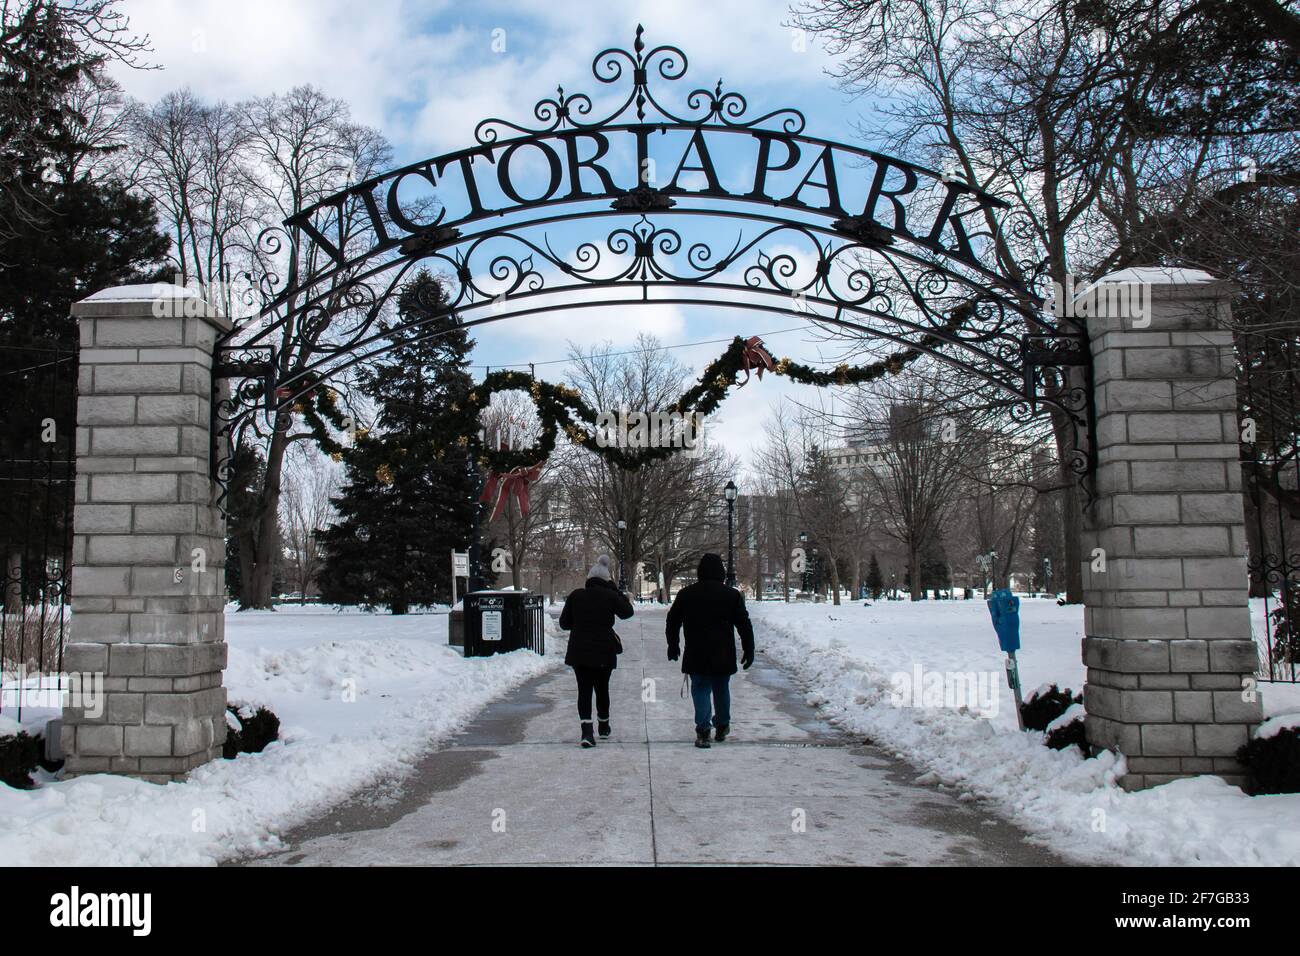 London, Ontario, Canada - February 6 2021: A couple walks under the iron wrought sign at Victoria Park's entrance in February during COVID-19 lockdown. Stock Photo